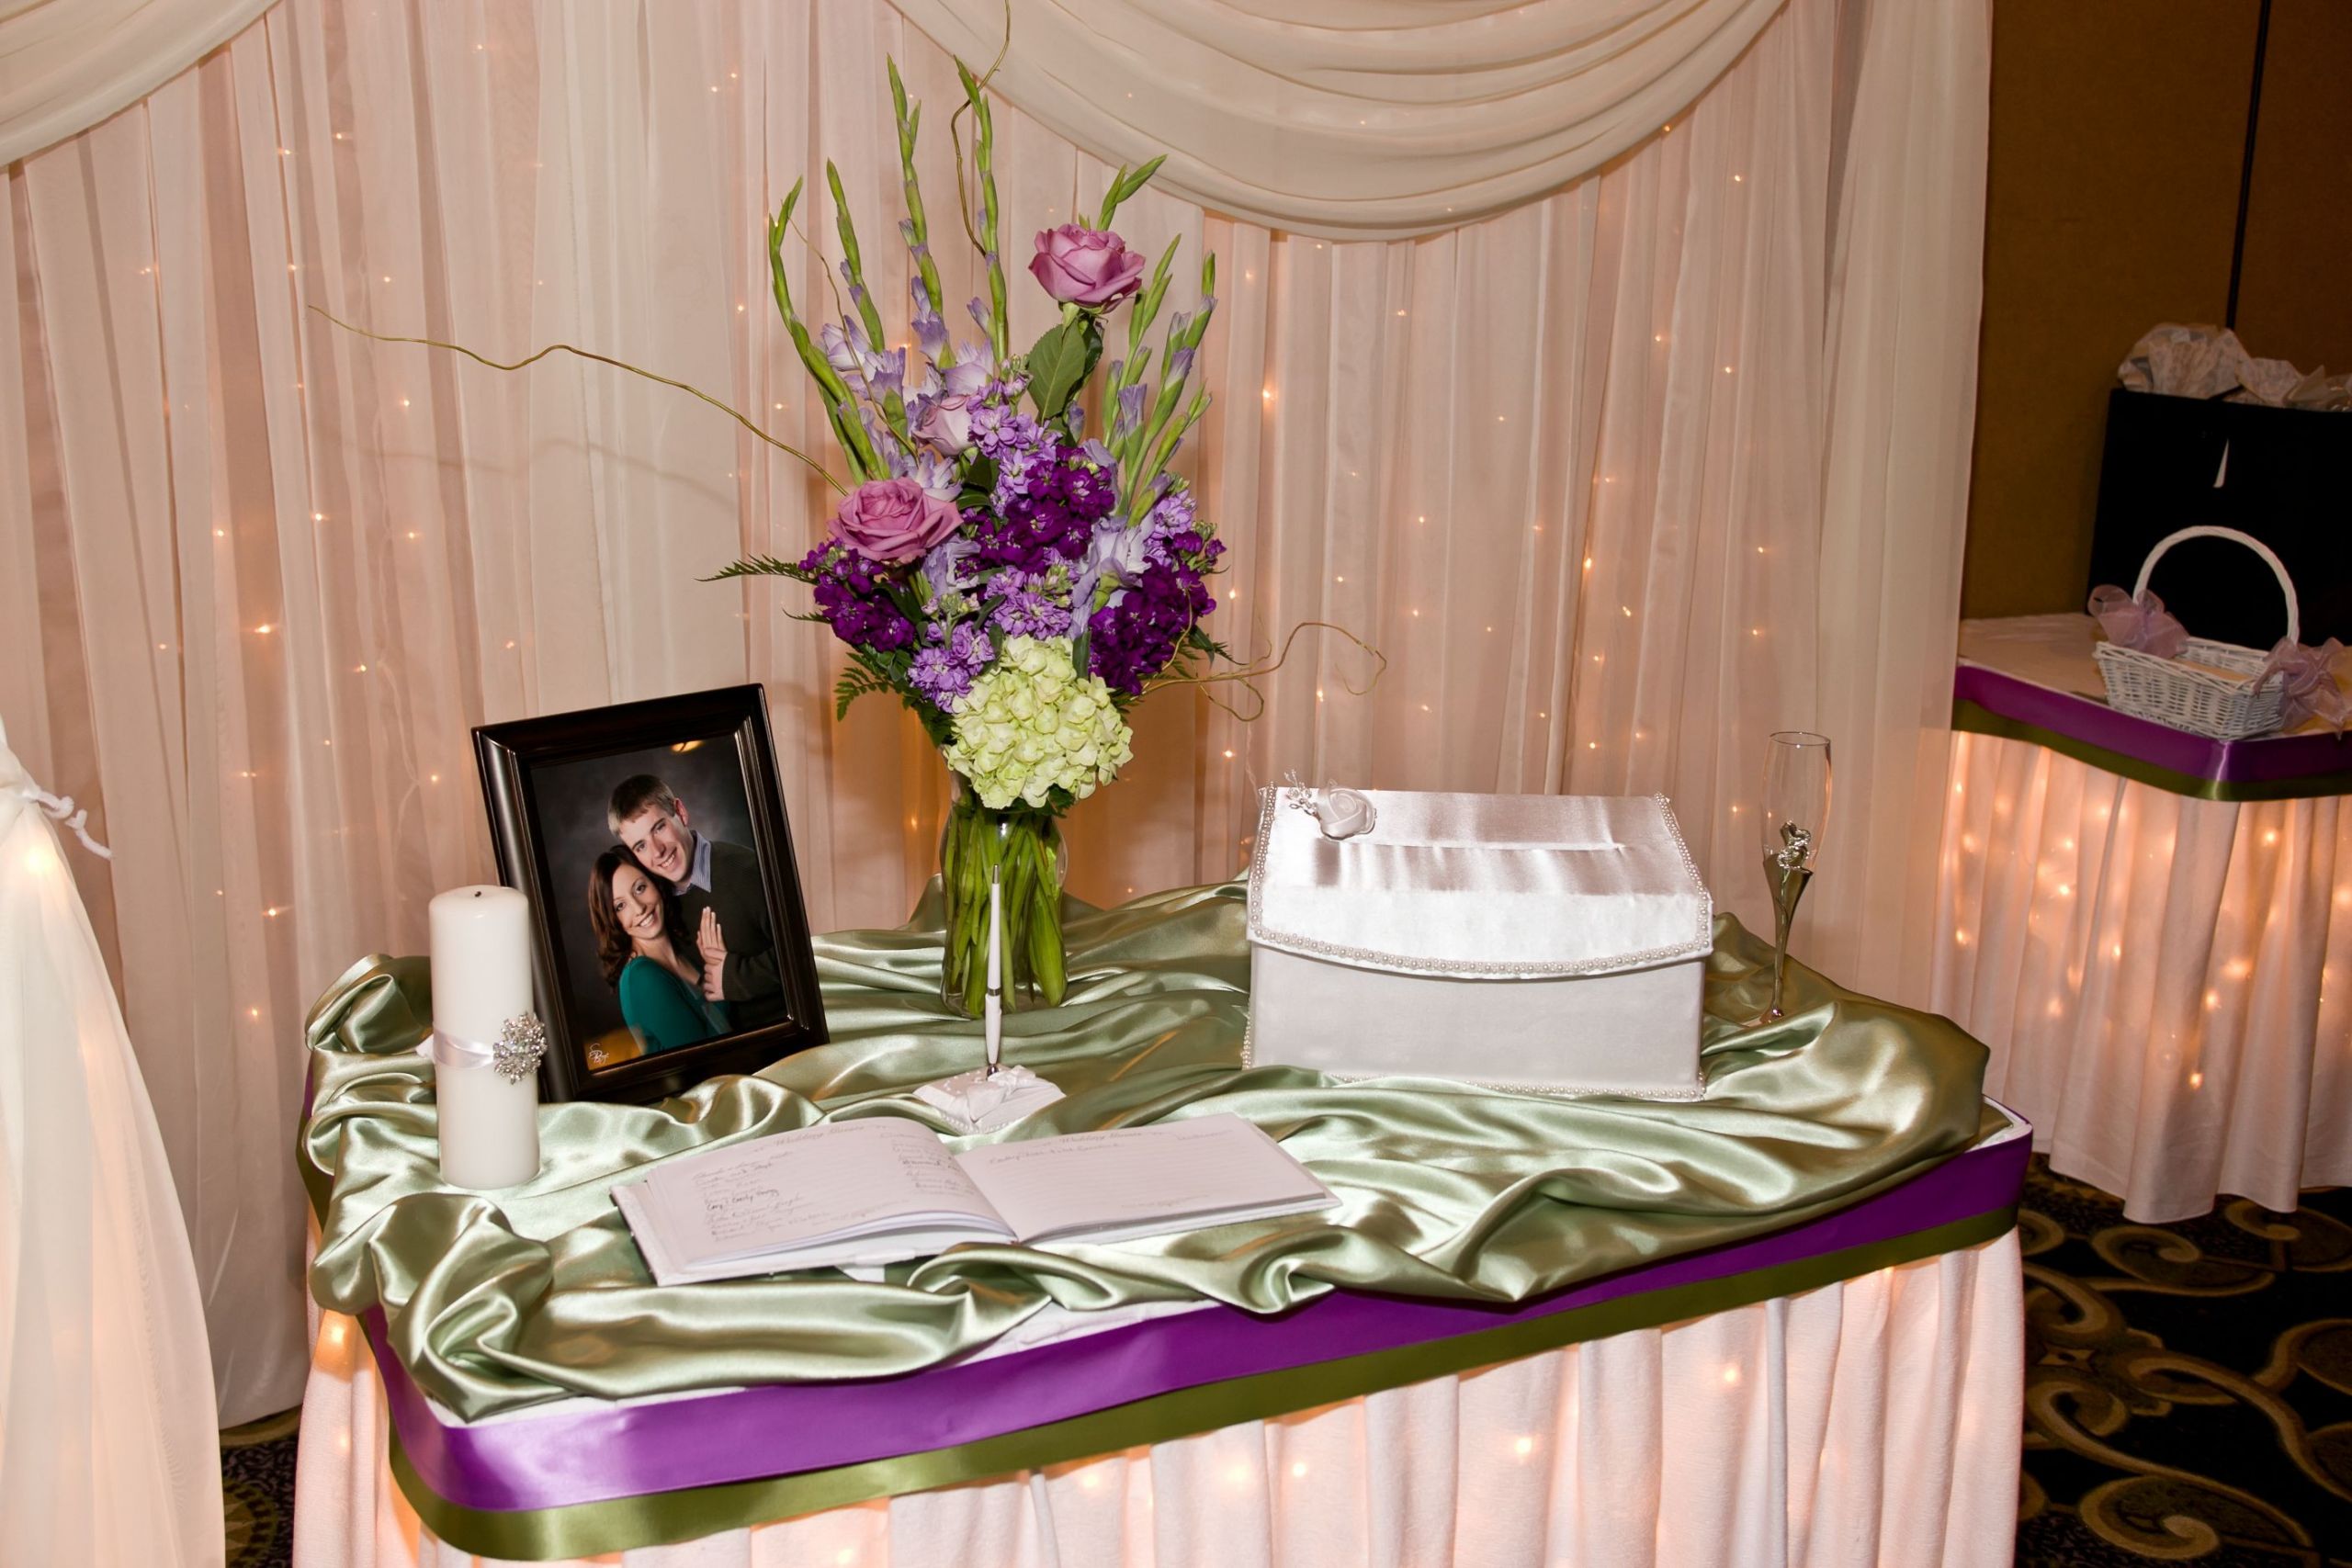 Wedding Guest Book Decoration Ideas
 Guest Book Table Decorations